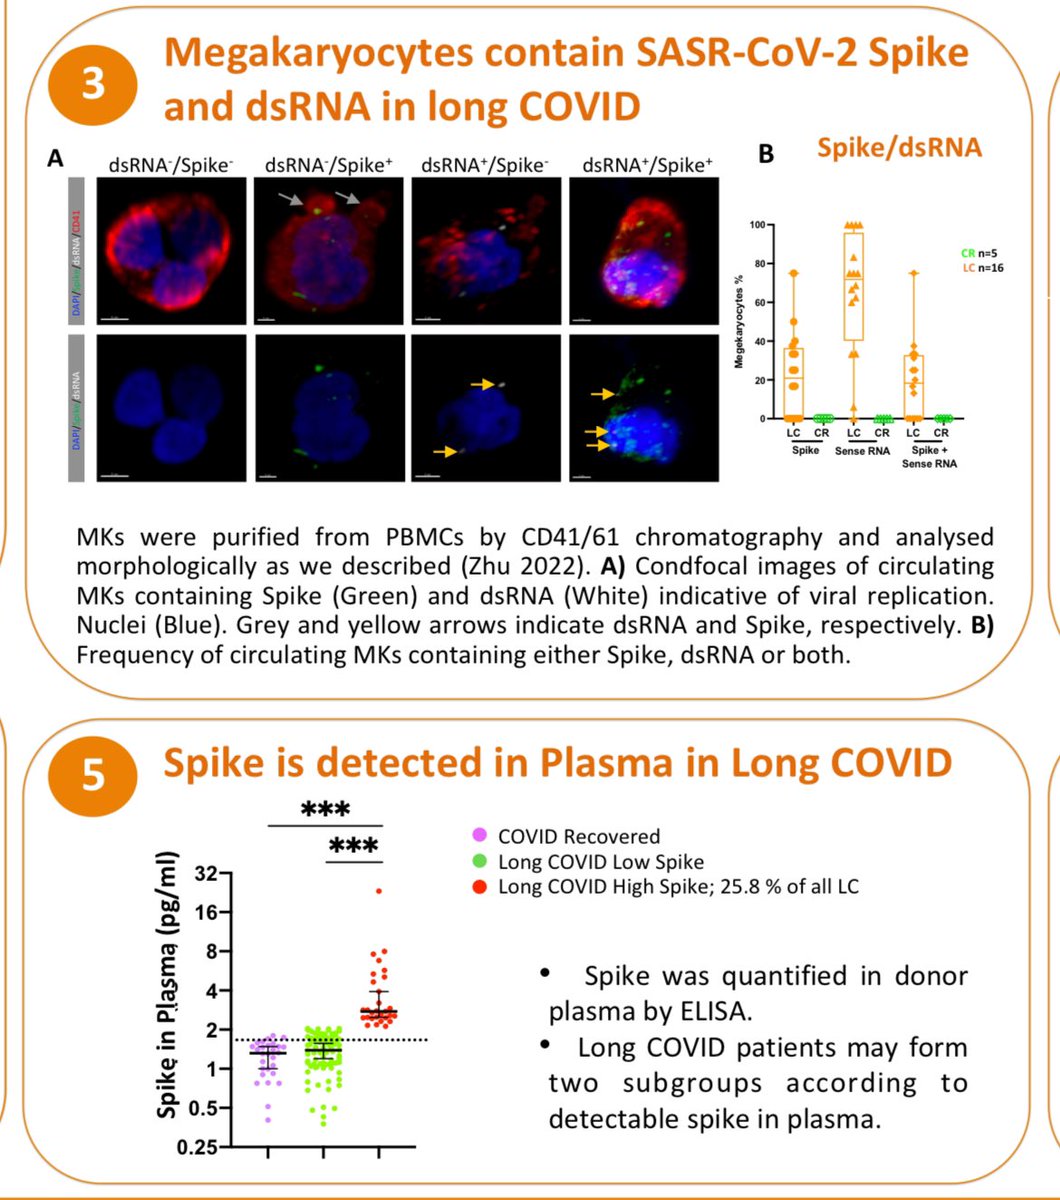 In #LongCovid, SARS-CoV-2 persists and replicates in MKs that in turn produce platelets containing virus. Circulating spike might be an additional sign of viral persistence that could serve as a Long COVID biomarker. The persistence of the virus could lead to abnormal platelet…